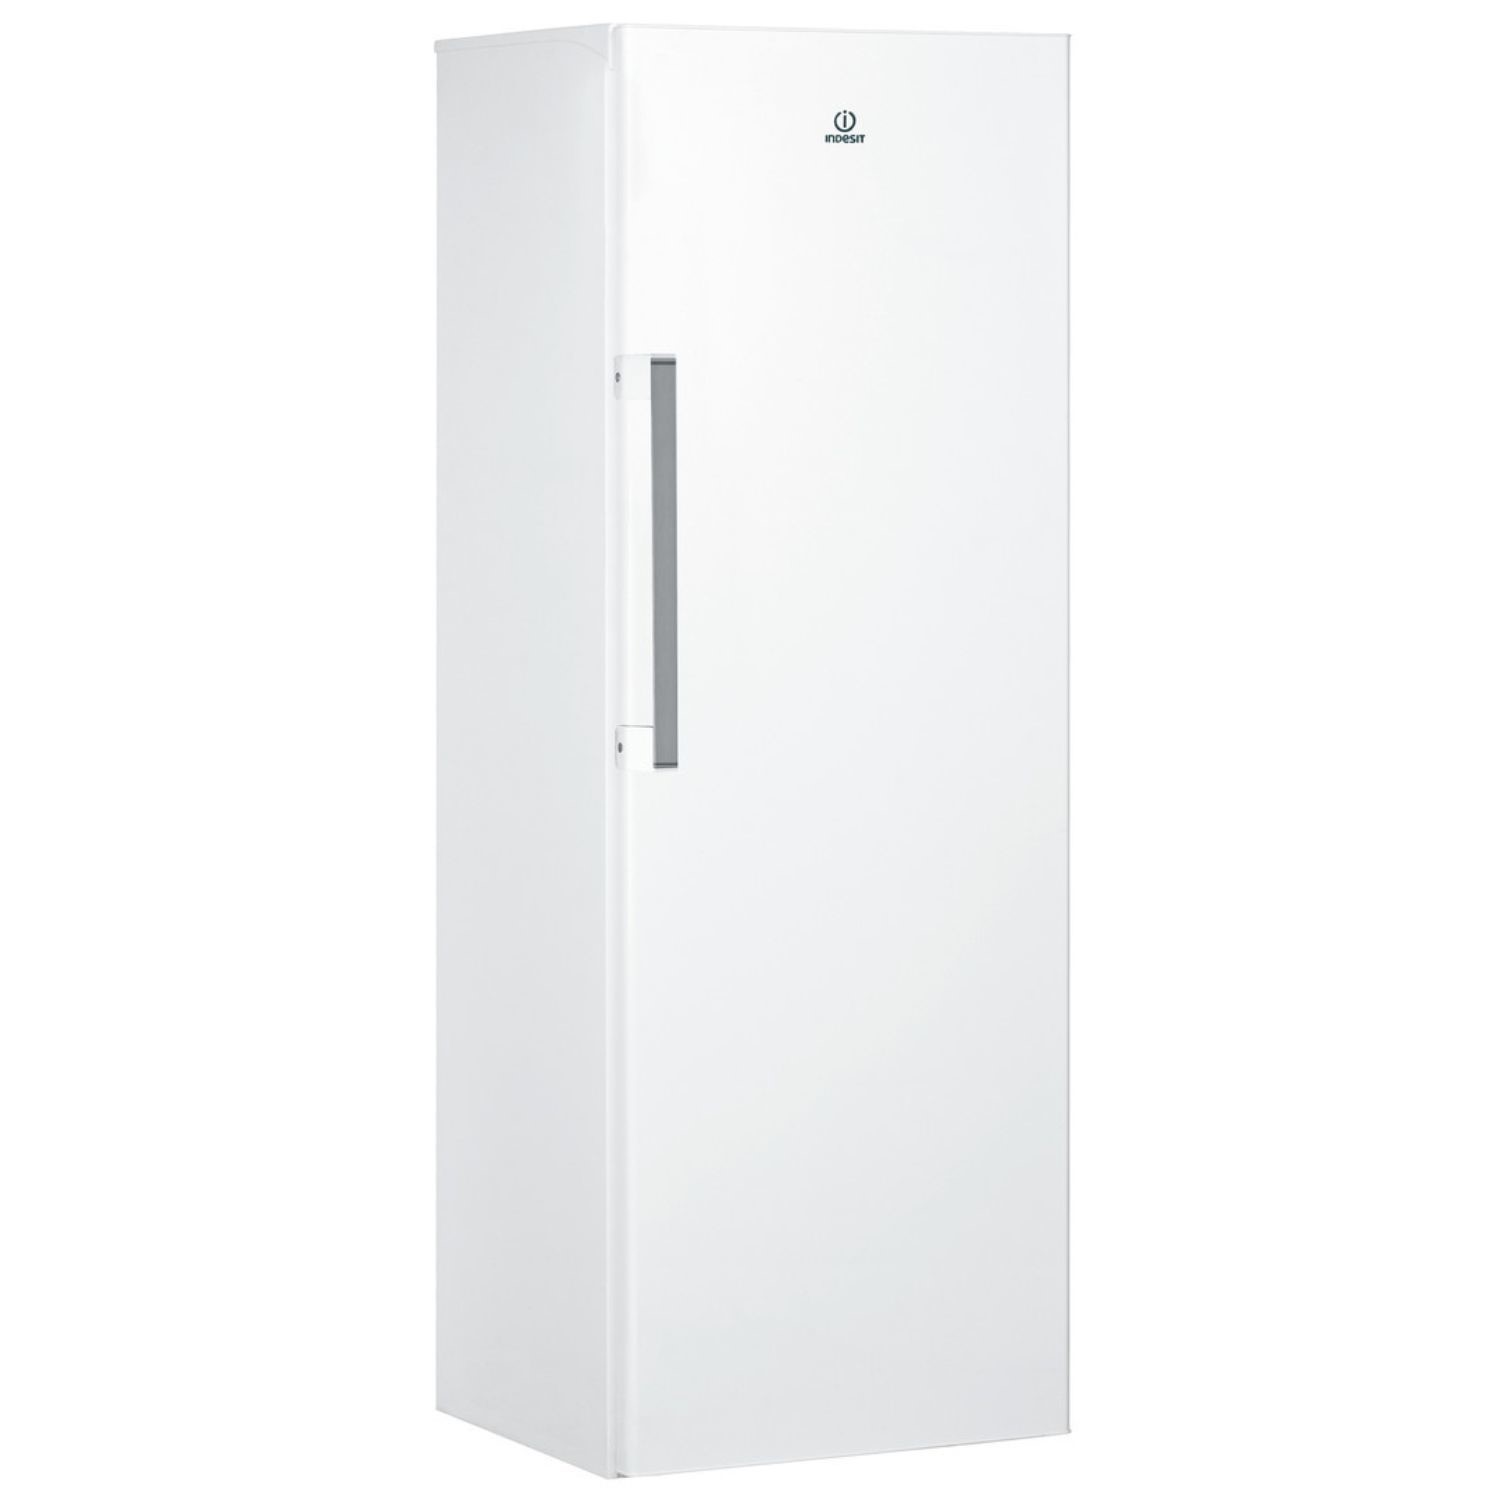 Photos - Other for Computer Indesit 368 Litre Tall Freestanding Larder Fridge - White 869991673180 